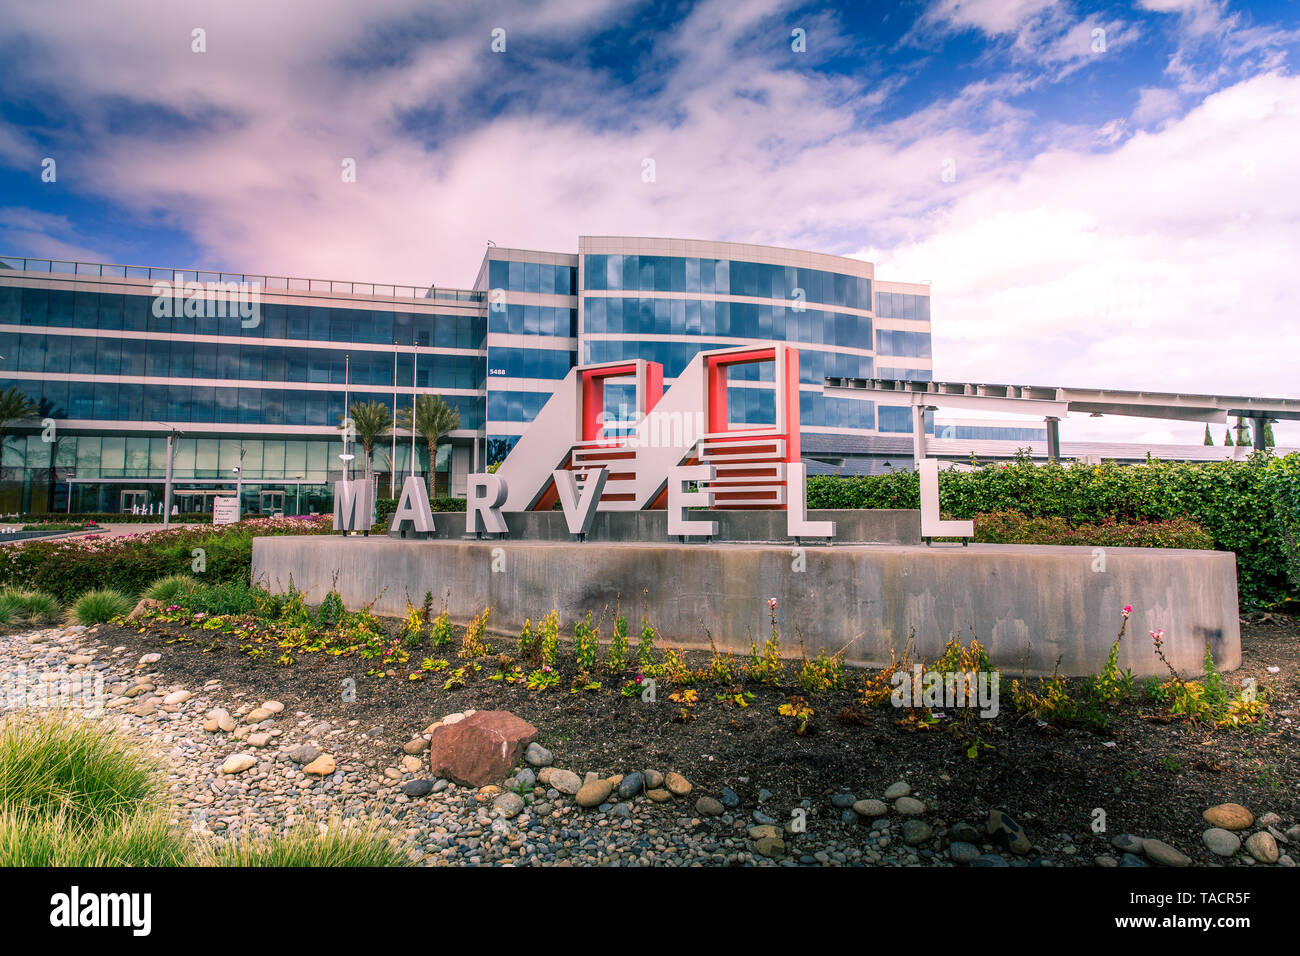 Santa Clara, CA/ USA - March 26, 2019: Marvell Semiconductor Inc. Corporate campus, Headquarters of Marvell Technology Group, LTD, producer of storage Stock Photo